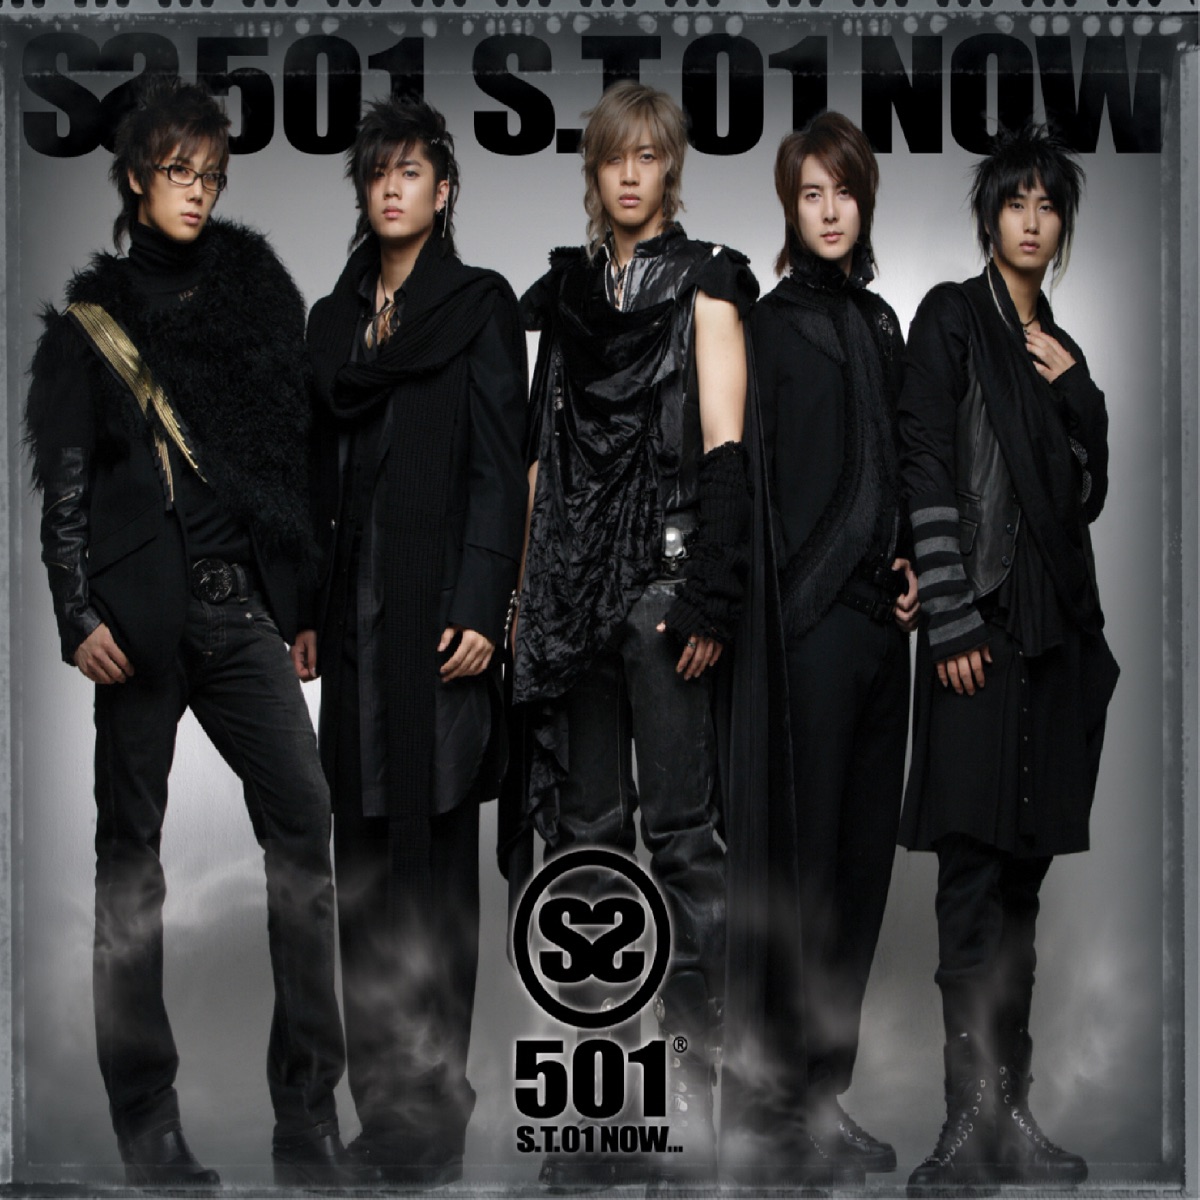 SS501 – Vol.1 SS501 S.T 01 NOW